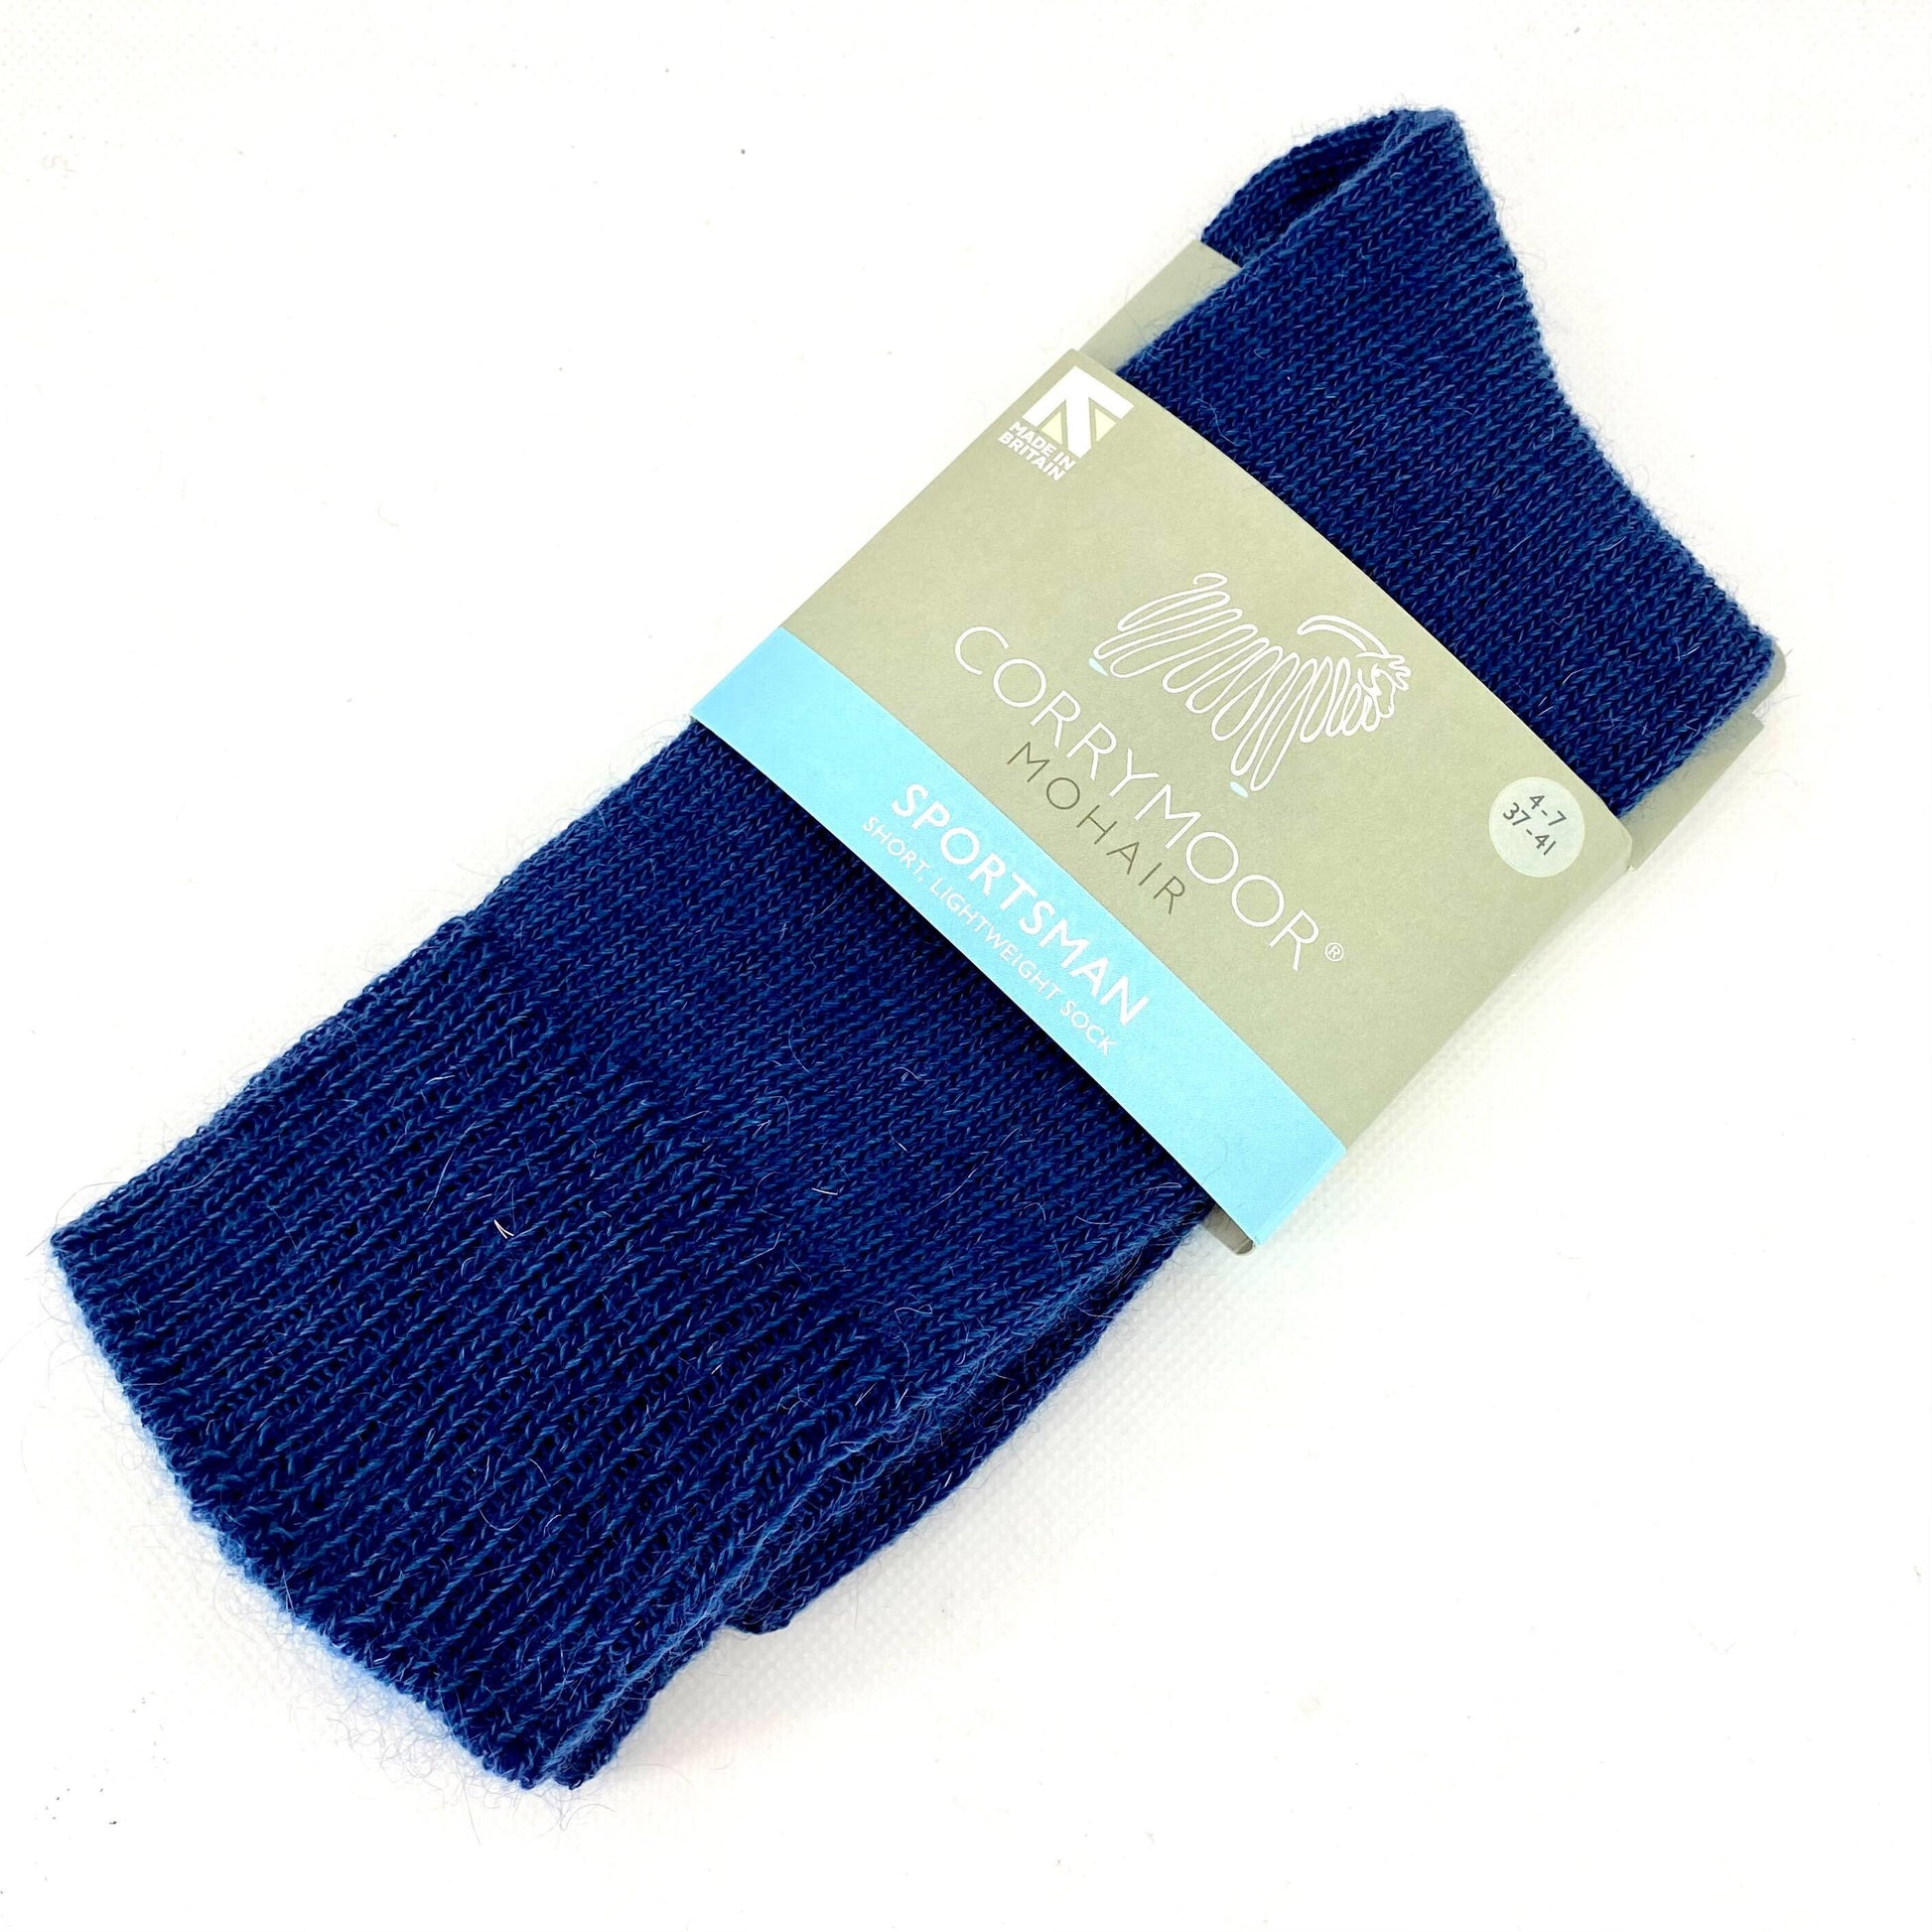 Navy Blue Mohair Socks - The Bristol Artisan Handmade Sustainable Gifts and Homewares.